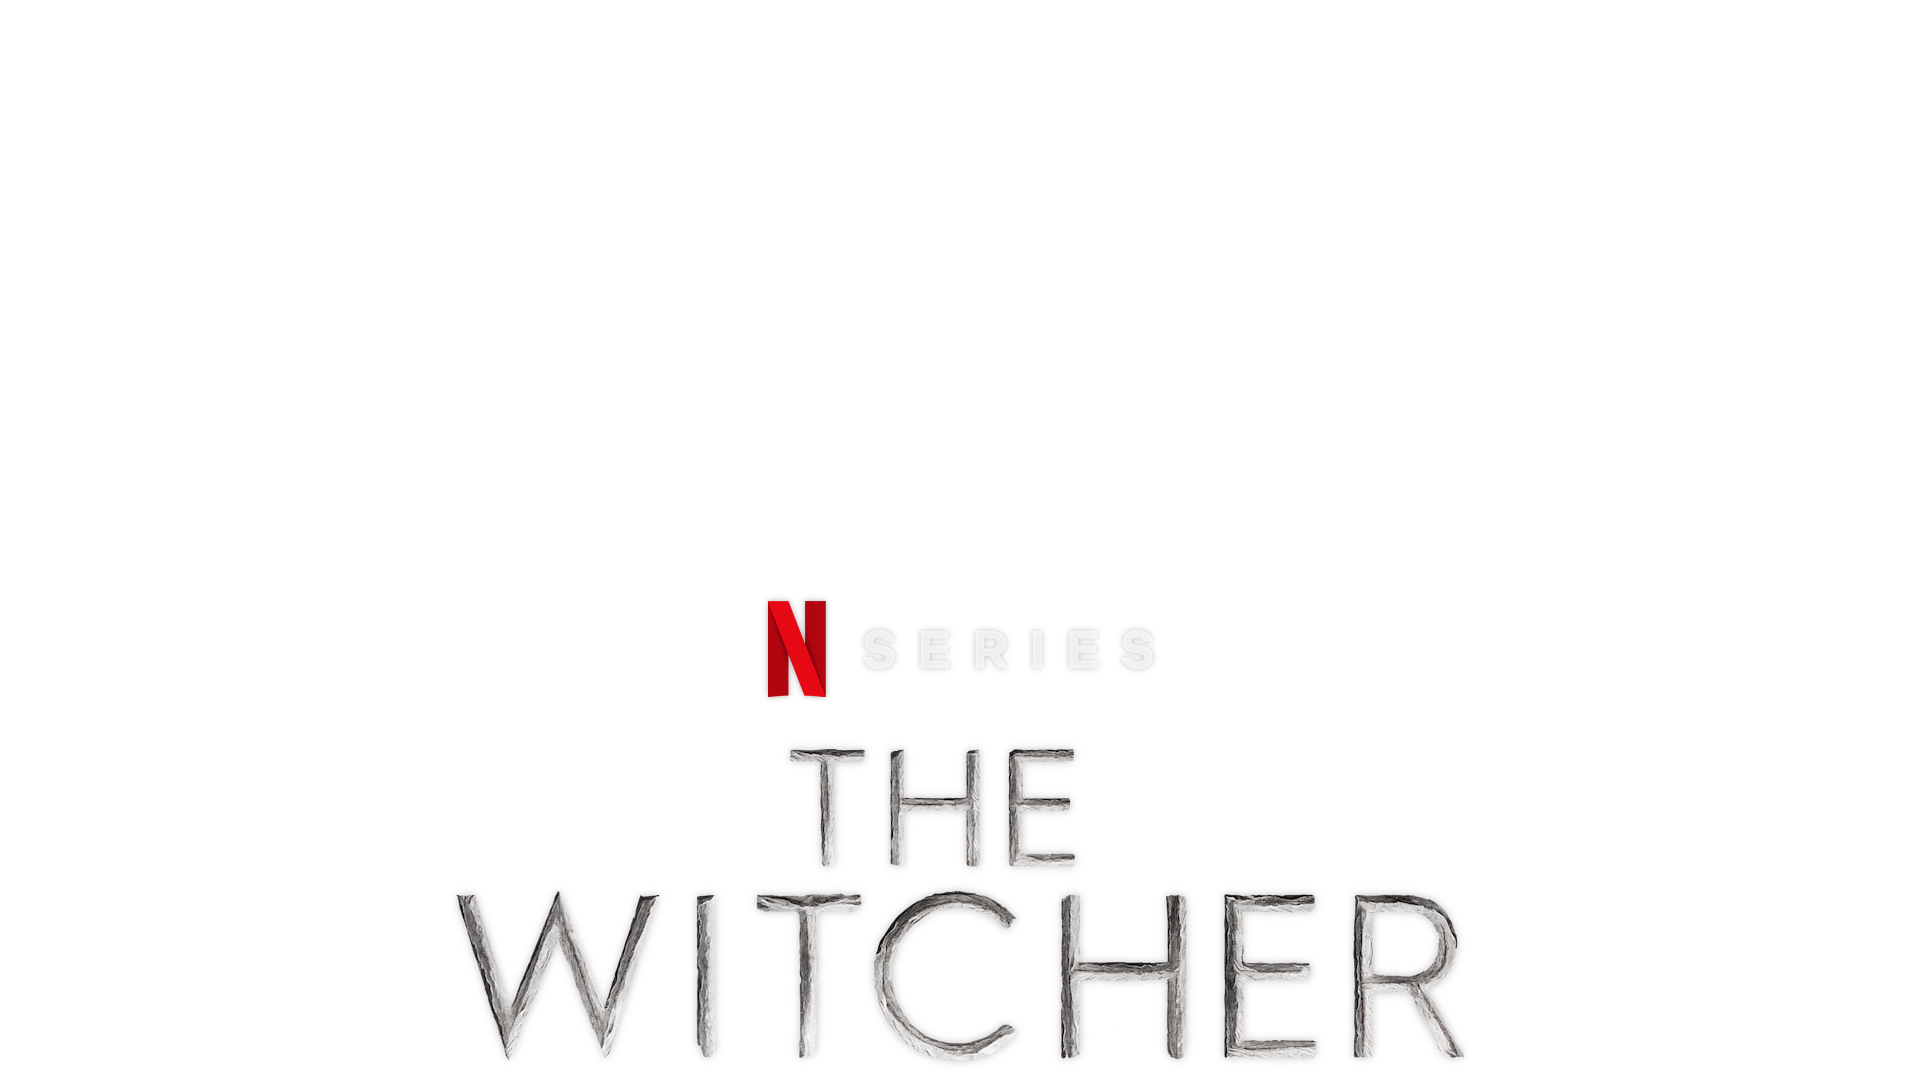 My Personal Casting Choices for the Netflix Series : r/witcher